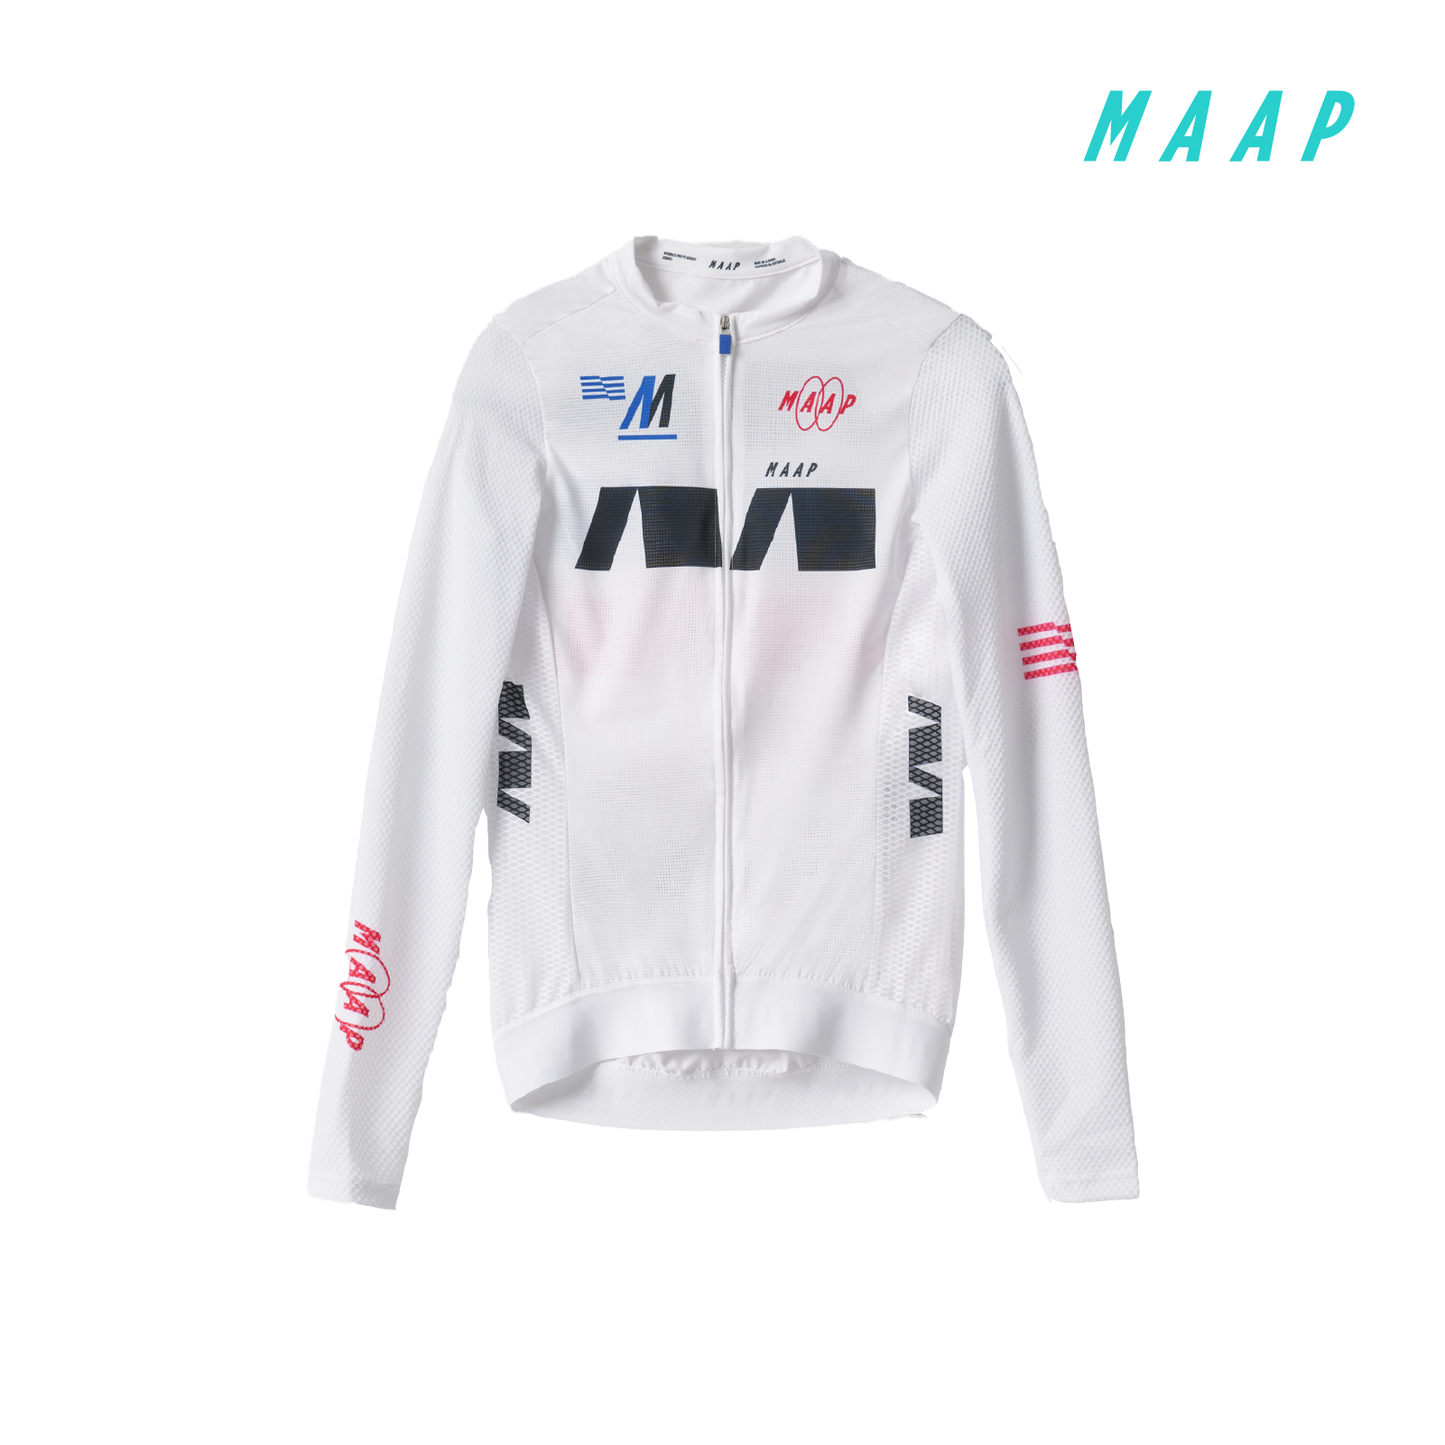 Women's Trace Pro Air LS Jersey White